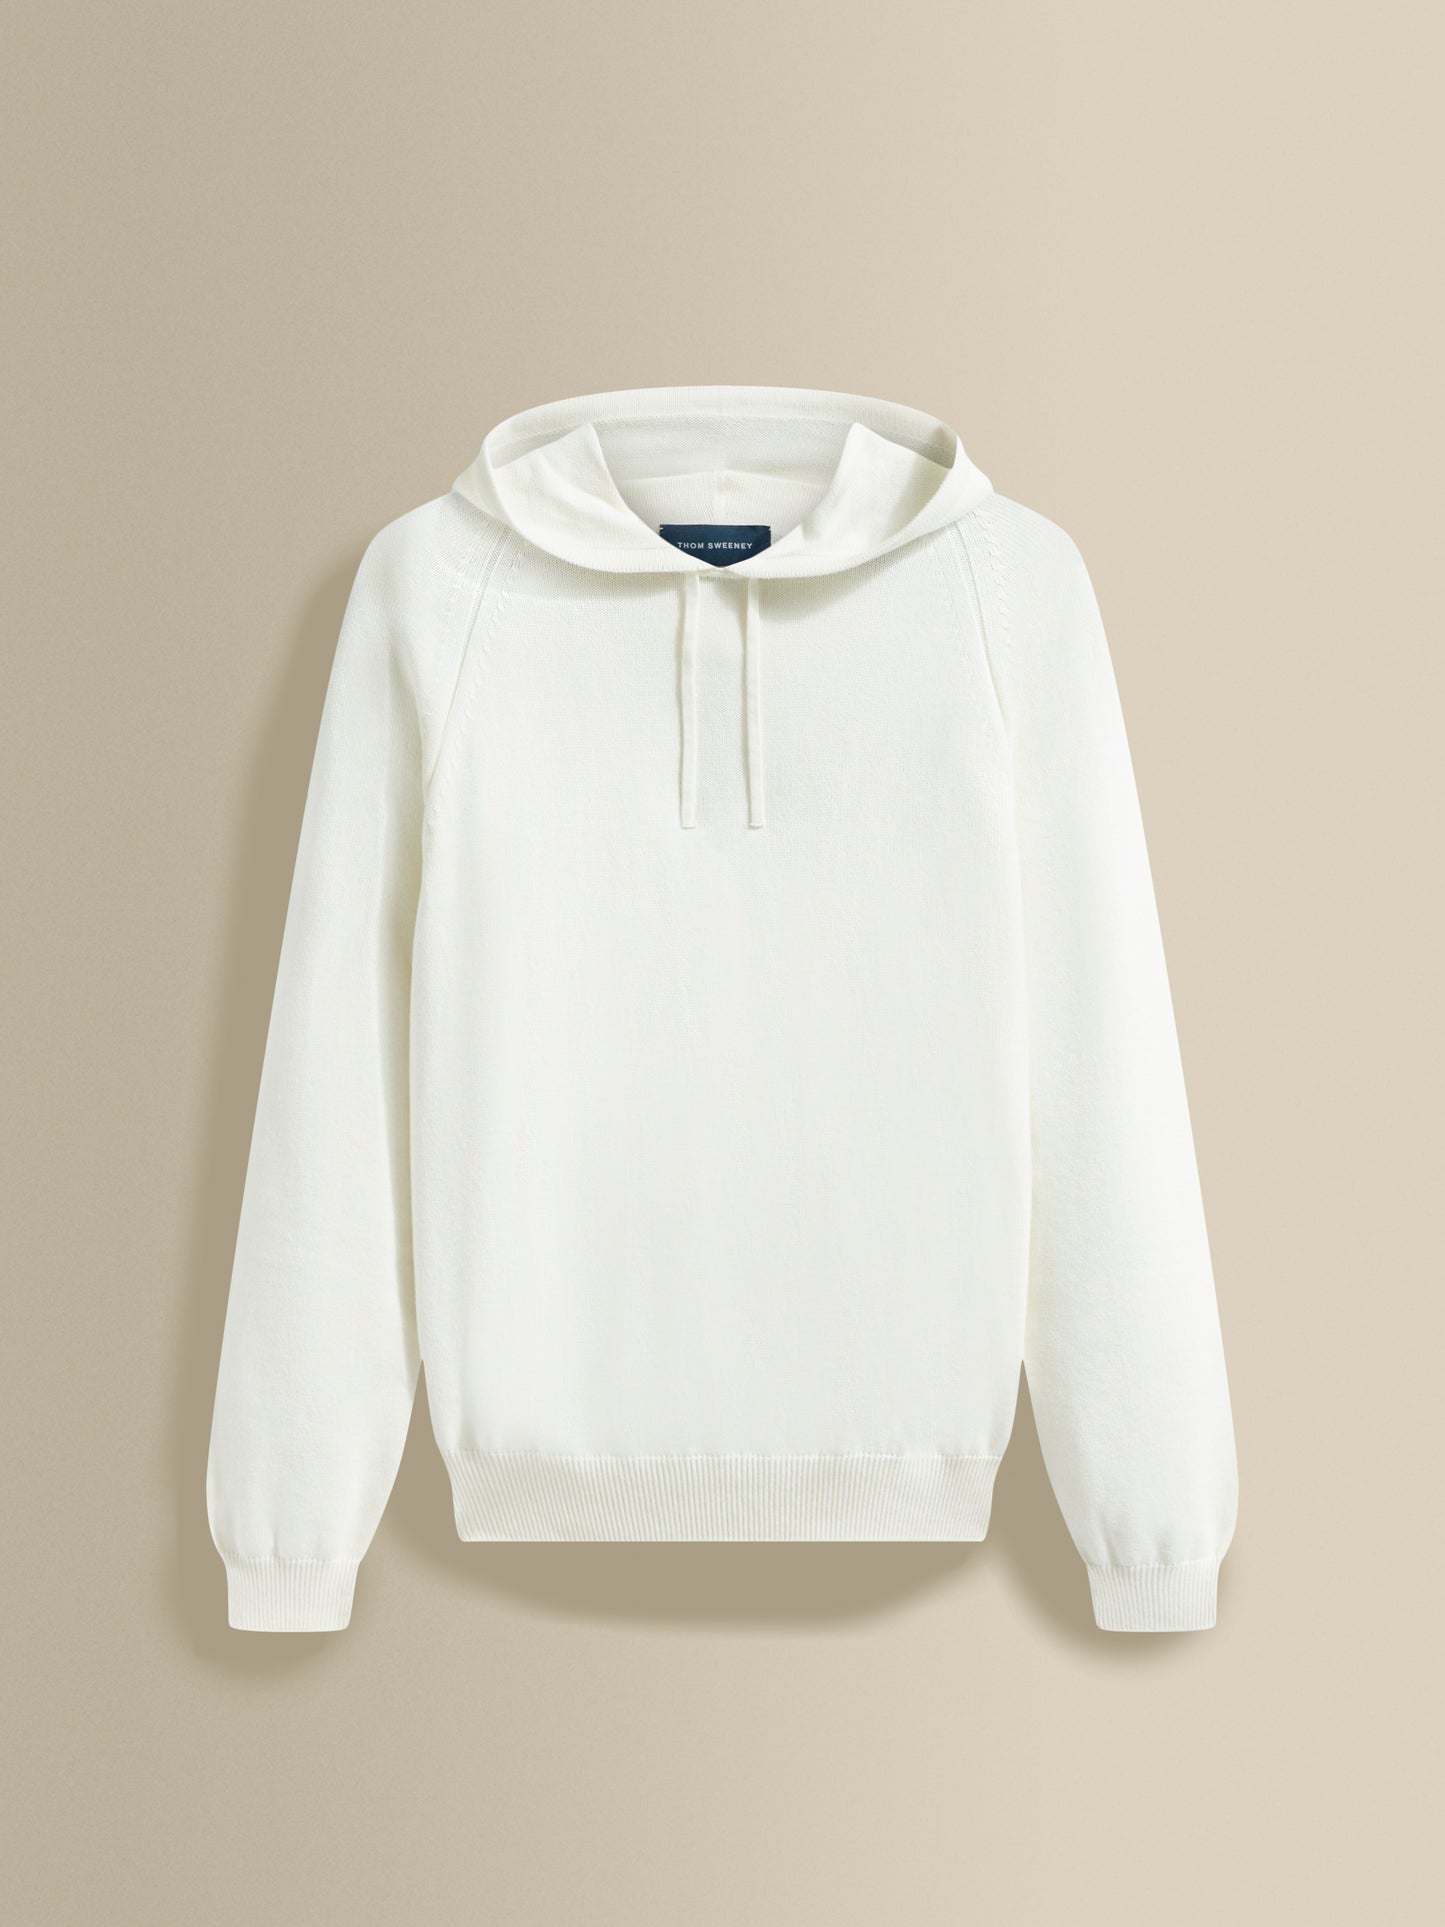 Cotton Cable Hoodie White Product Image